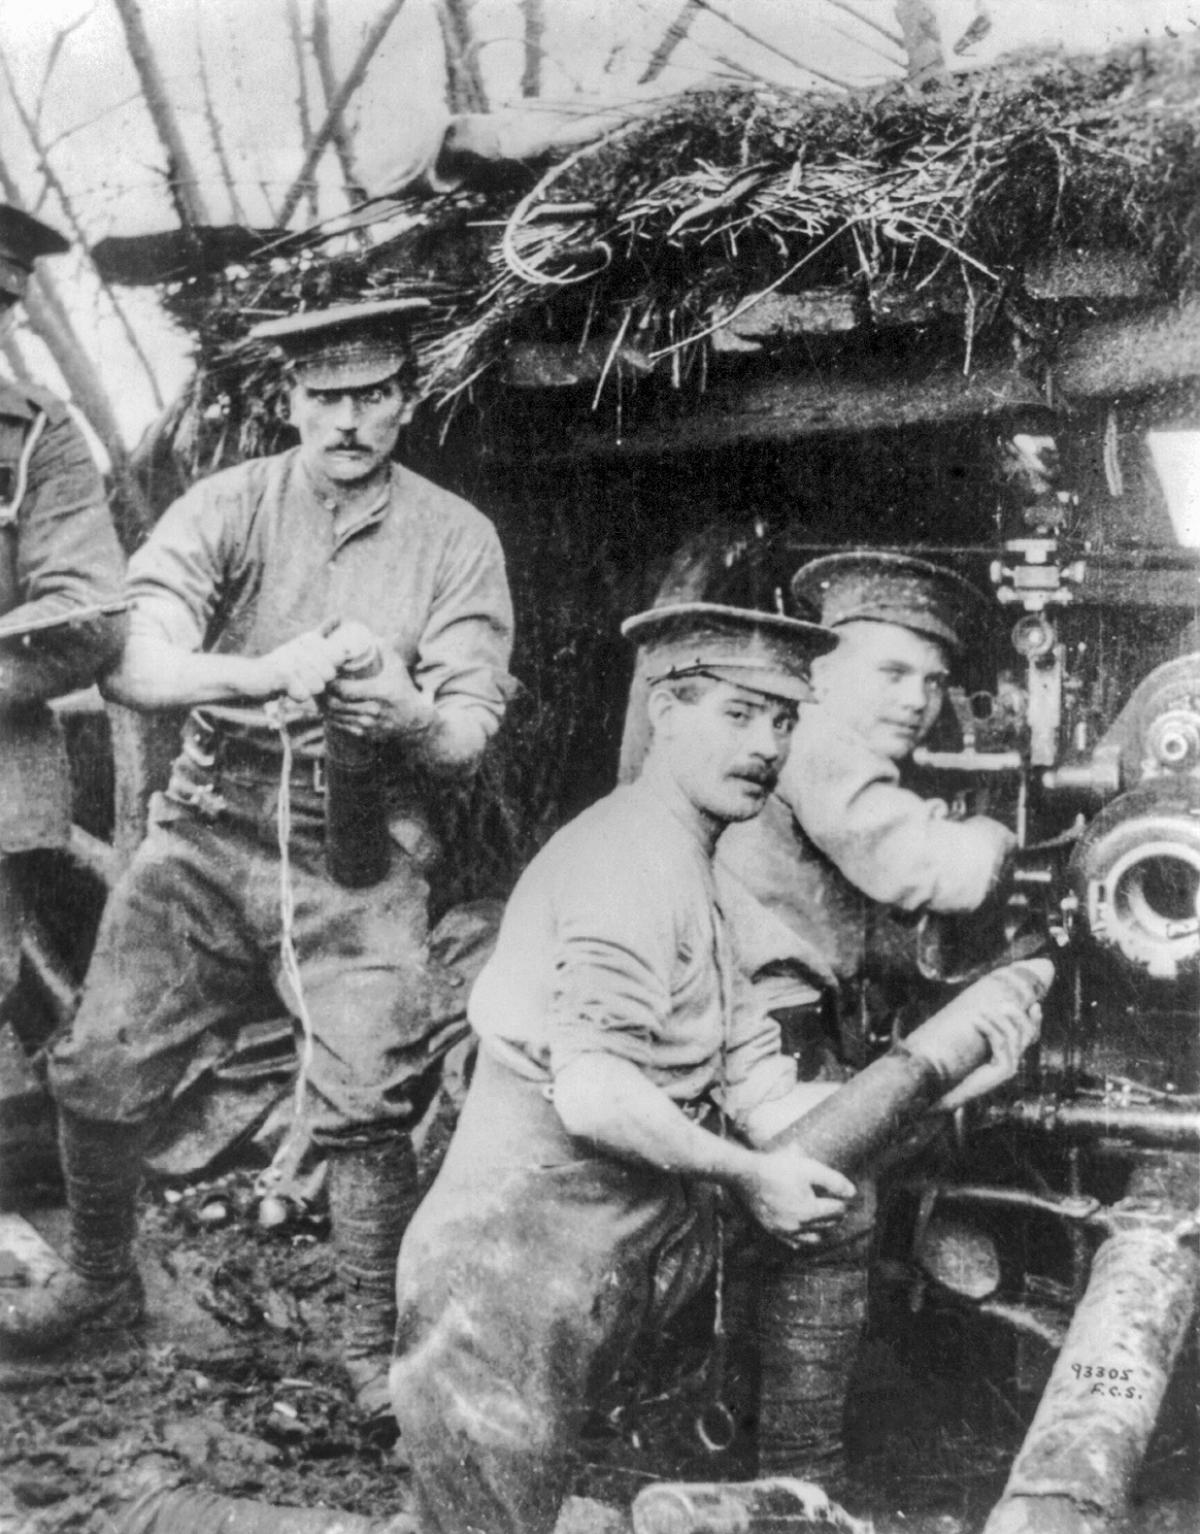 British troops load their gun in a camouflaged bunker circa April 1915